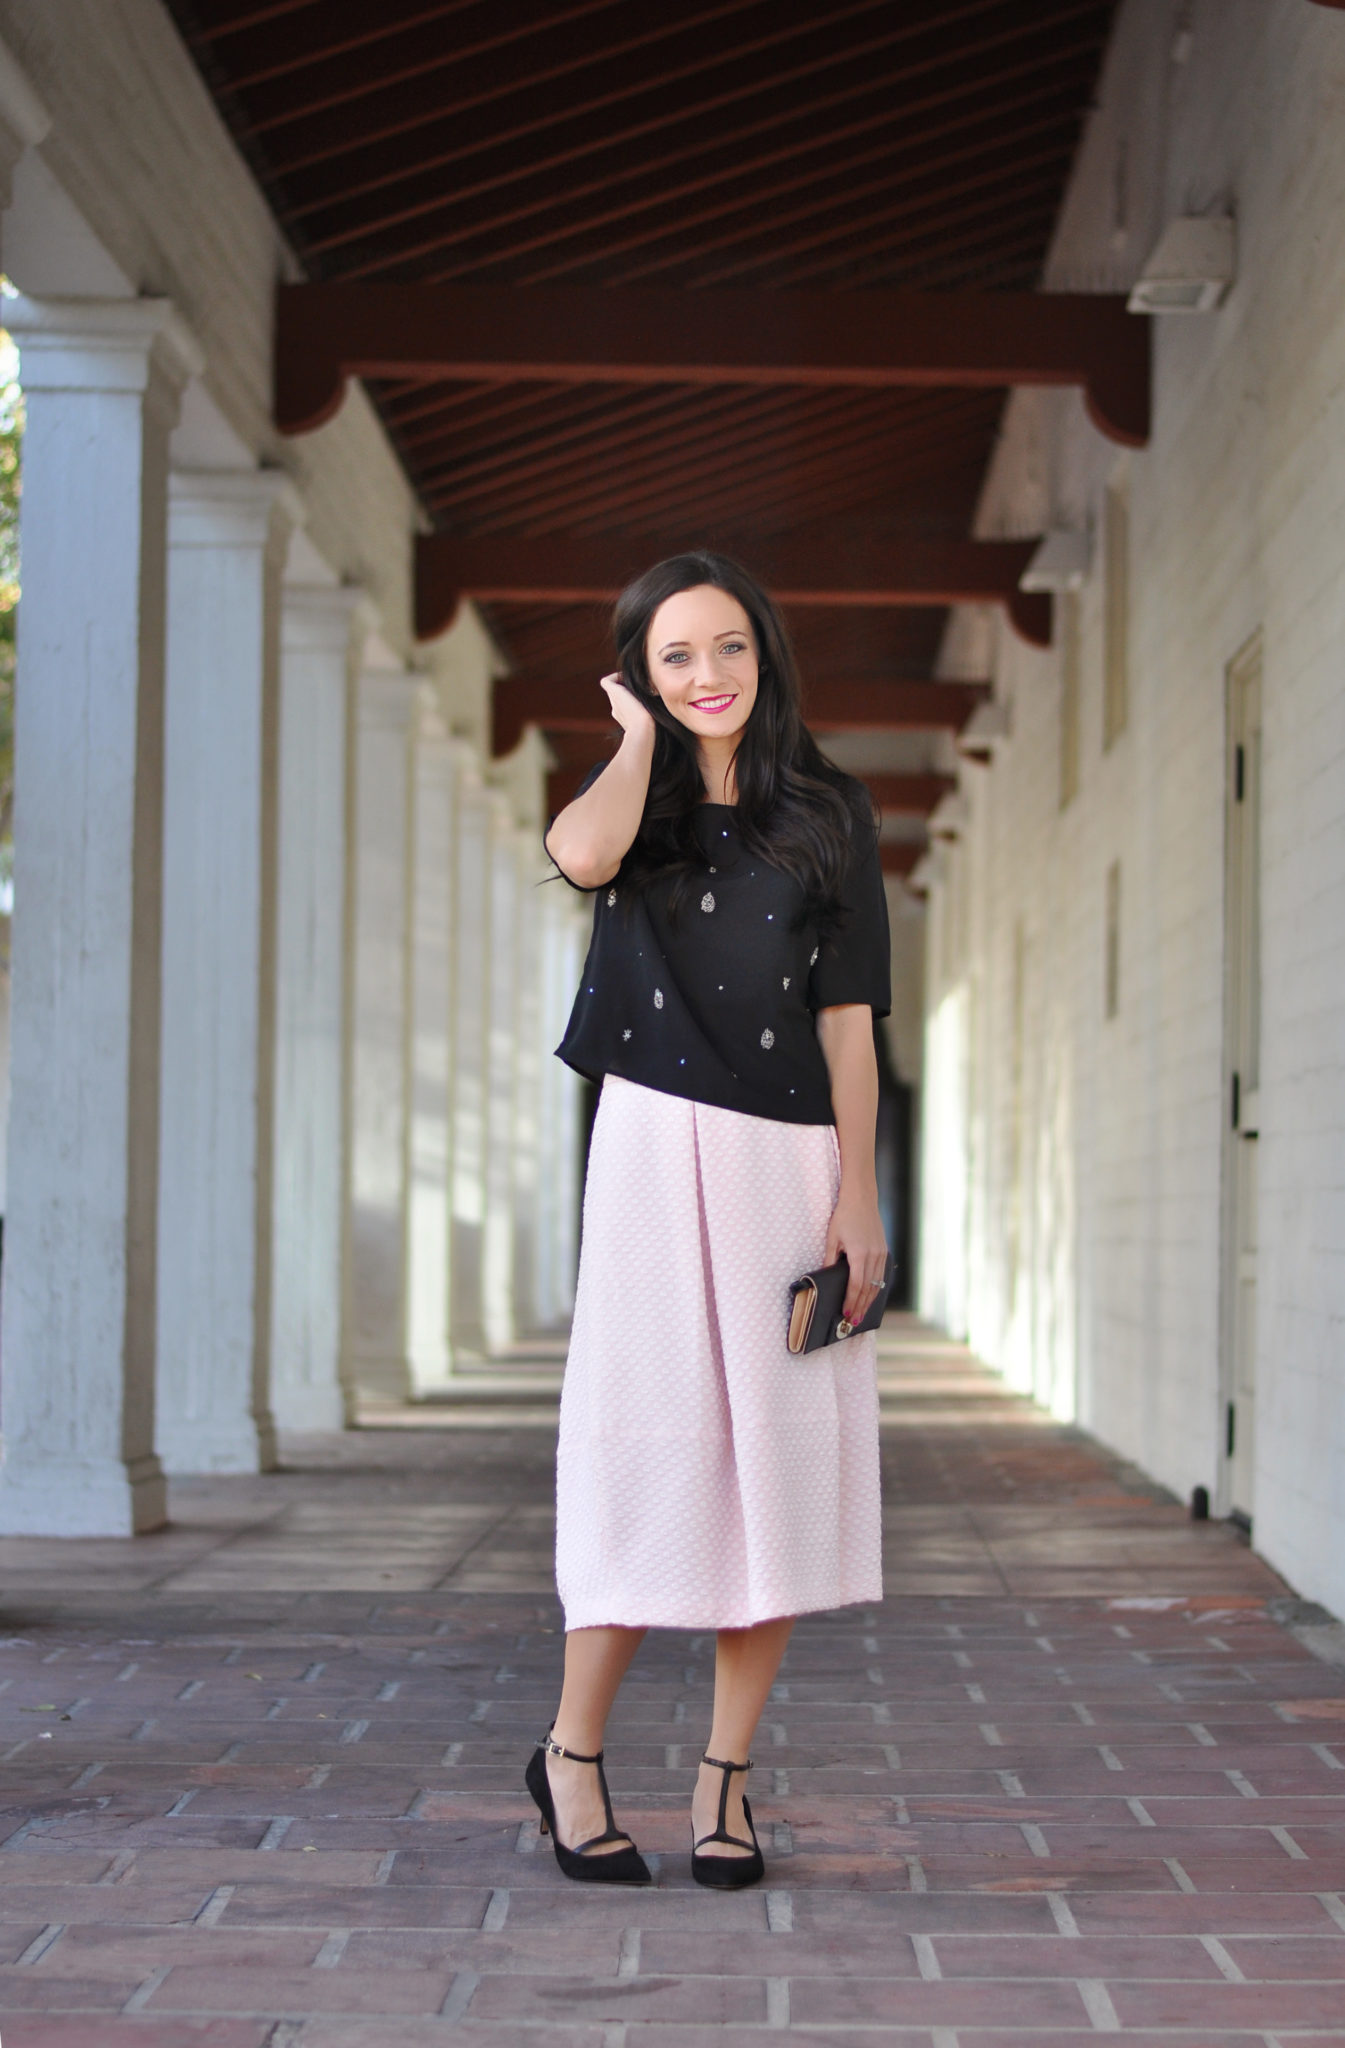 Cute Spring Outfits featured by top US fashion blog Outfits & Outings; Image of a woman wearing black top and pink skirt.